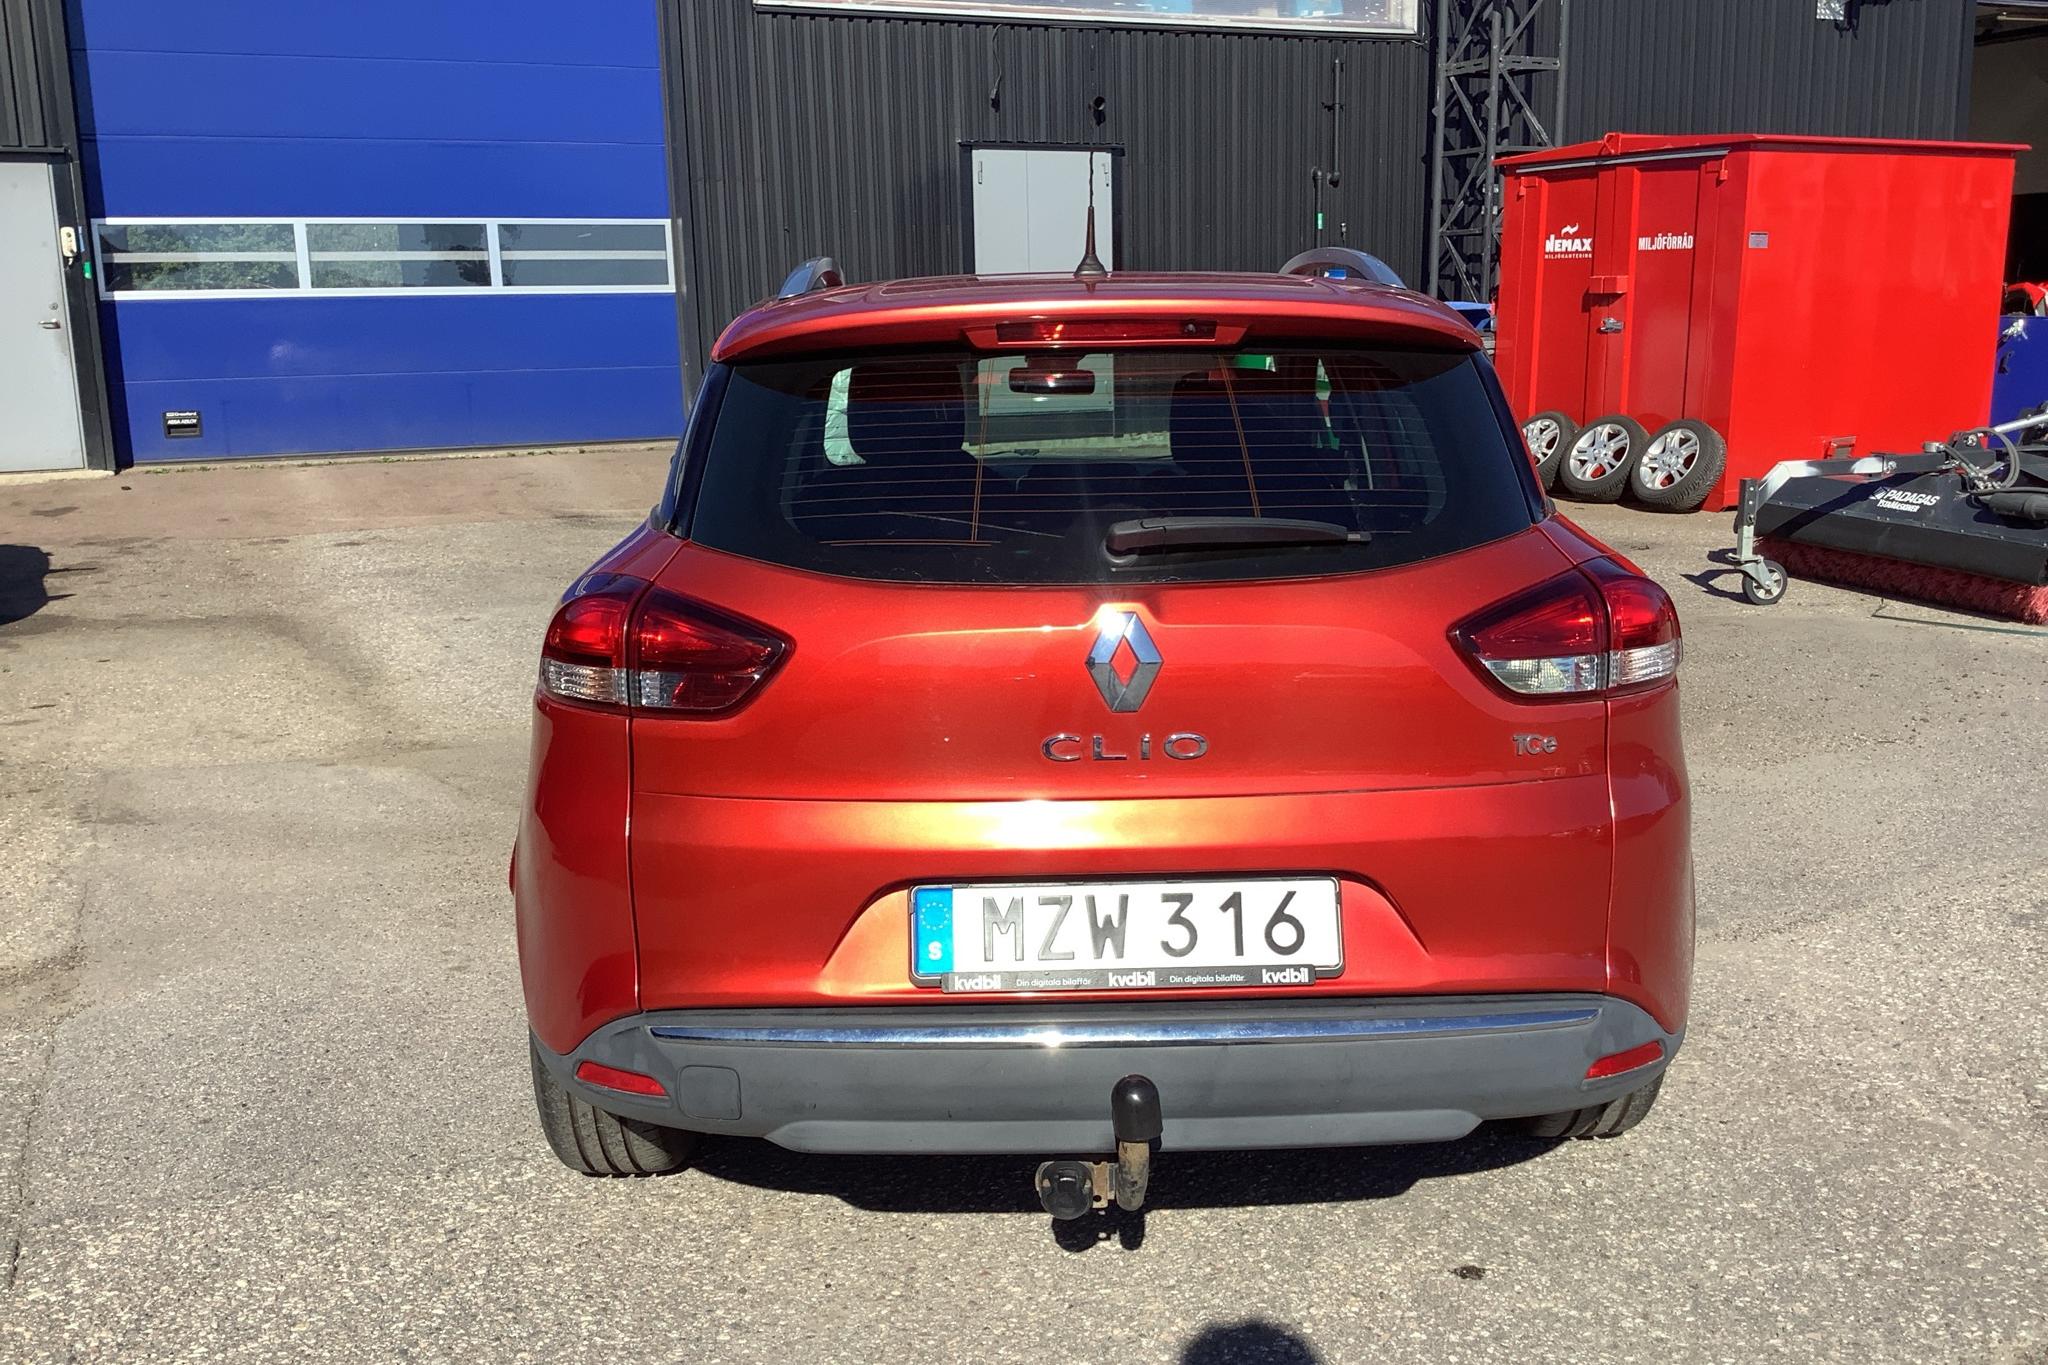 Renault Clio IV 0.9 TCe 90 Sports Tourer (90hk) - 98 820 km - Manual - red - 2015